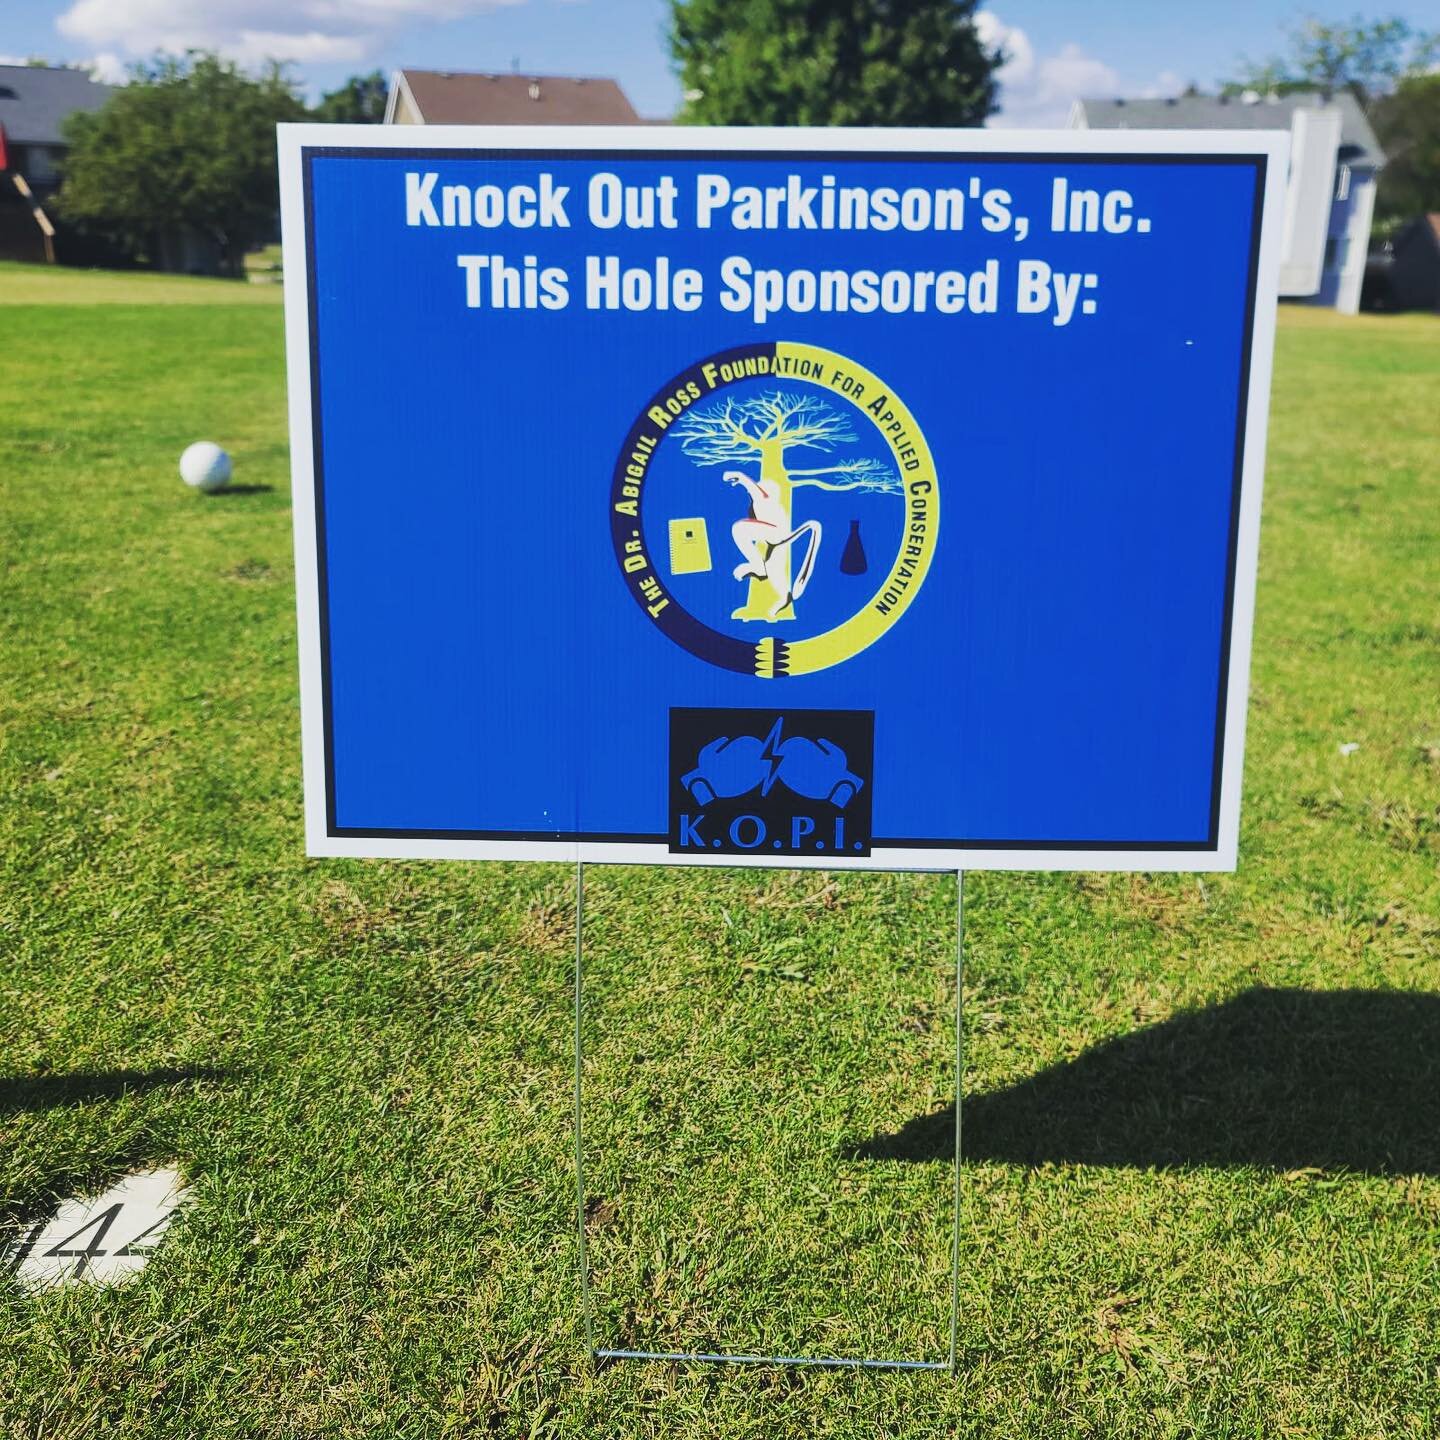 🌟 Good News Alert! 🏌️&zwj;♀️🏌️&zwj;♂️

We are excited to share that TDARFAC had the opportunity to co-sponsor a golf play day for Knockout Parkinson's Inc., a remarkable local community organization! 🎗️🎉

It was an honor to be part of this event